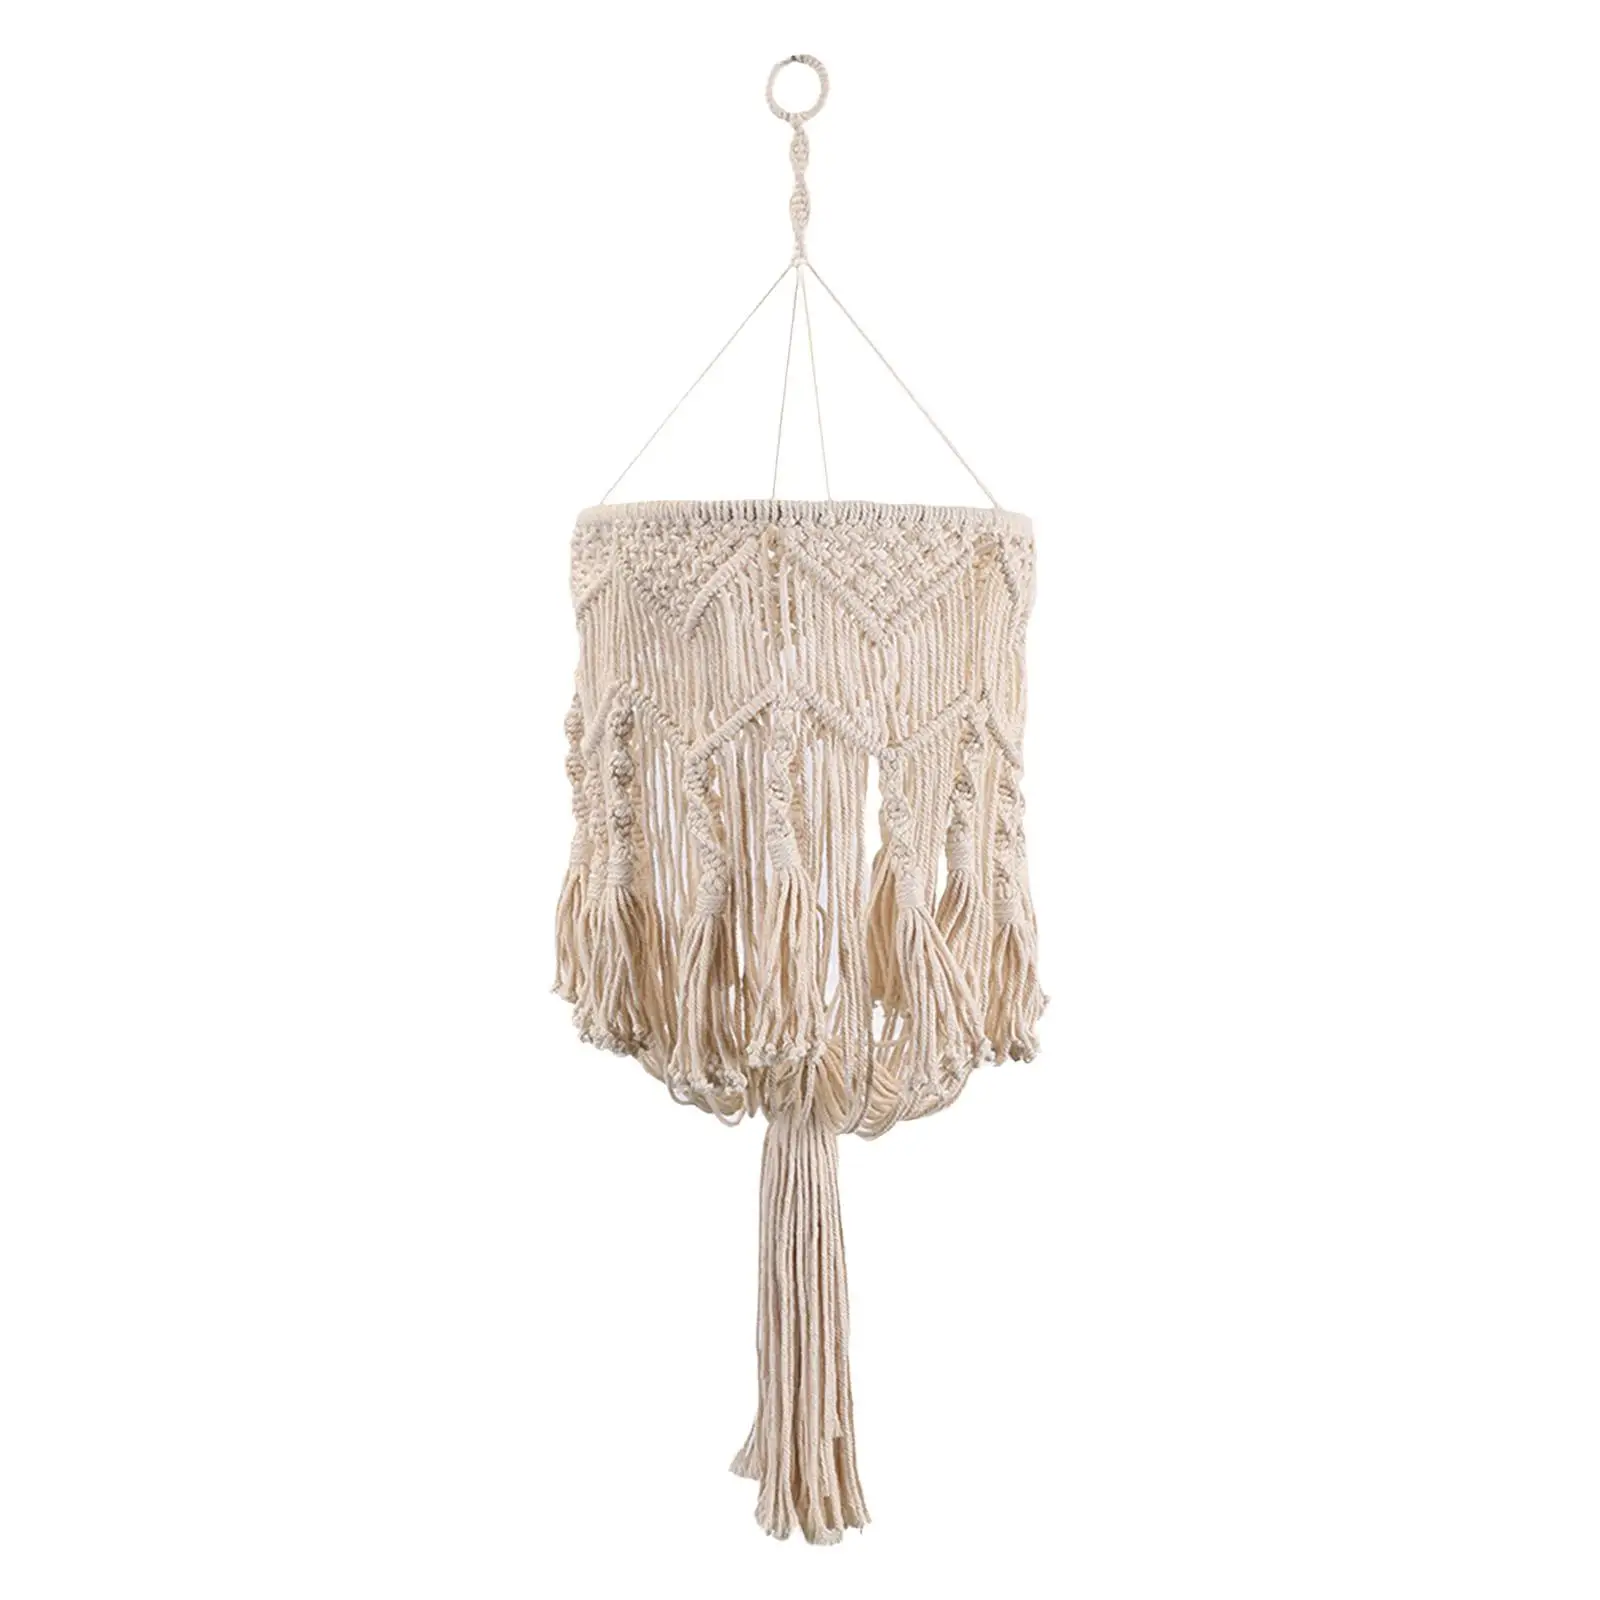 Macrame Tassel Lamp Shade Ceiling Light Cover Boho Hanging Handmade Woven Lampshade for Party Nursery Bedroom Hotel Decoration